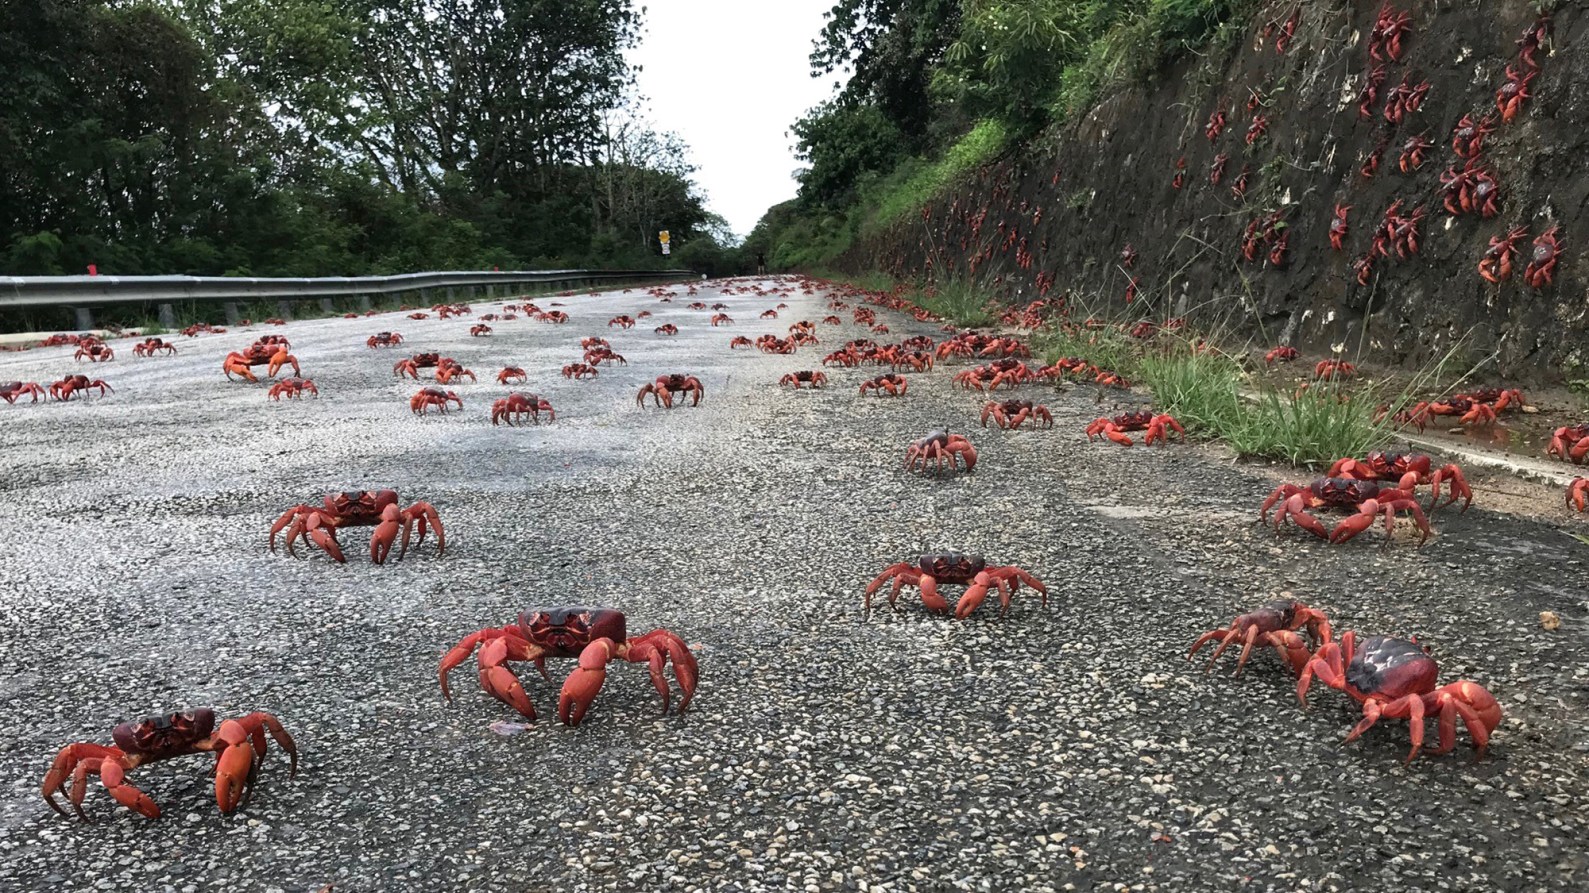 Millions Of Red Crabs Make Their Way To Ocean As Part Of Annual Migration On Christmas Island